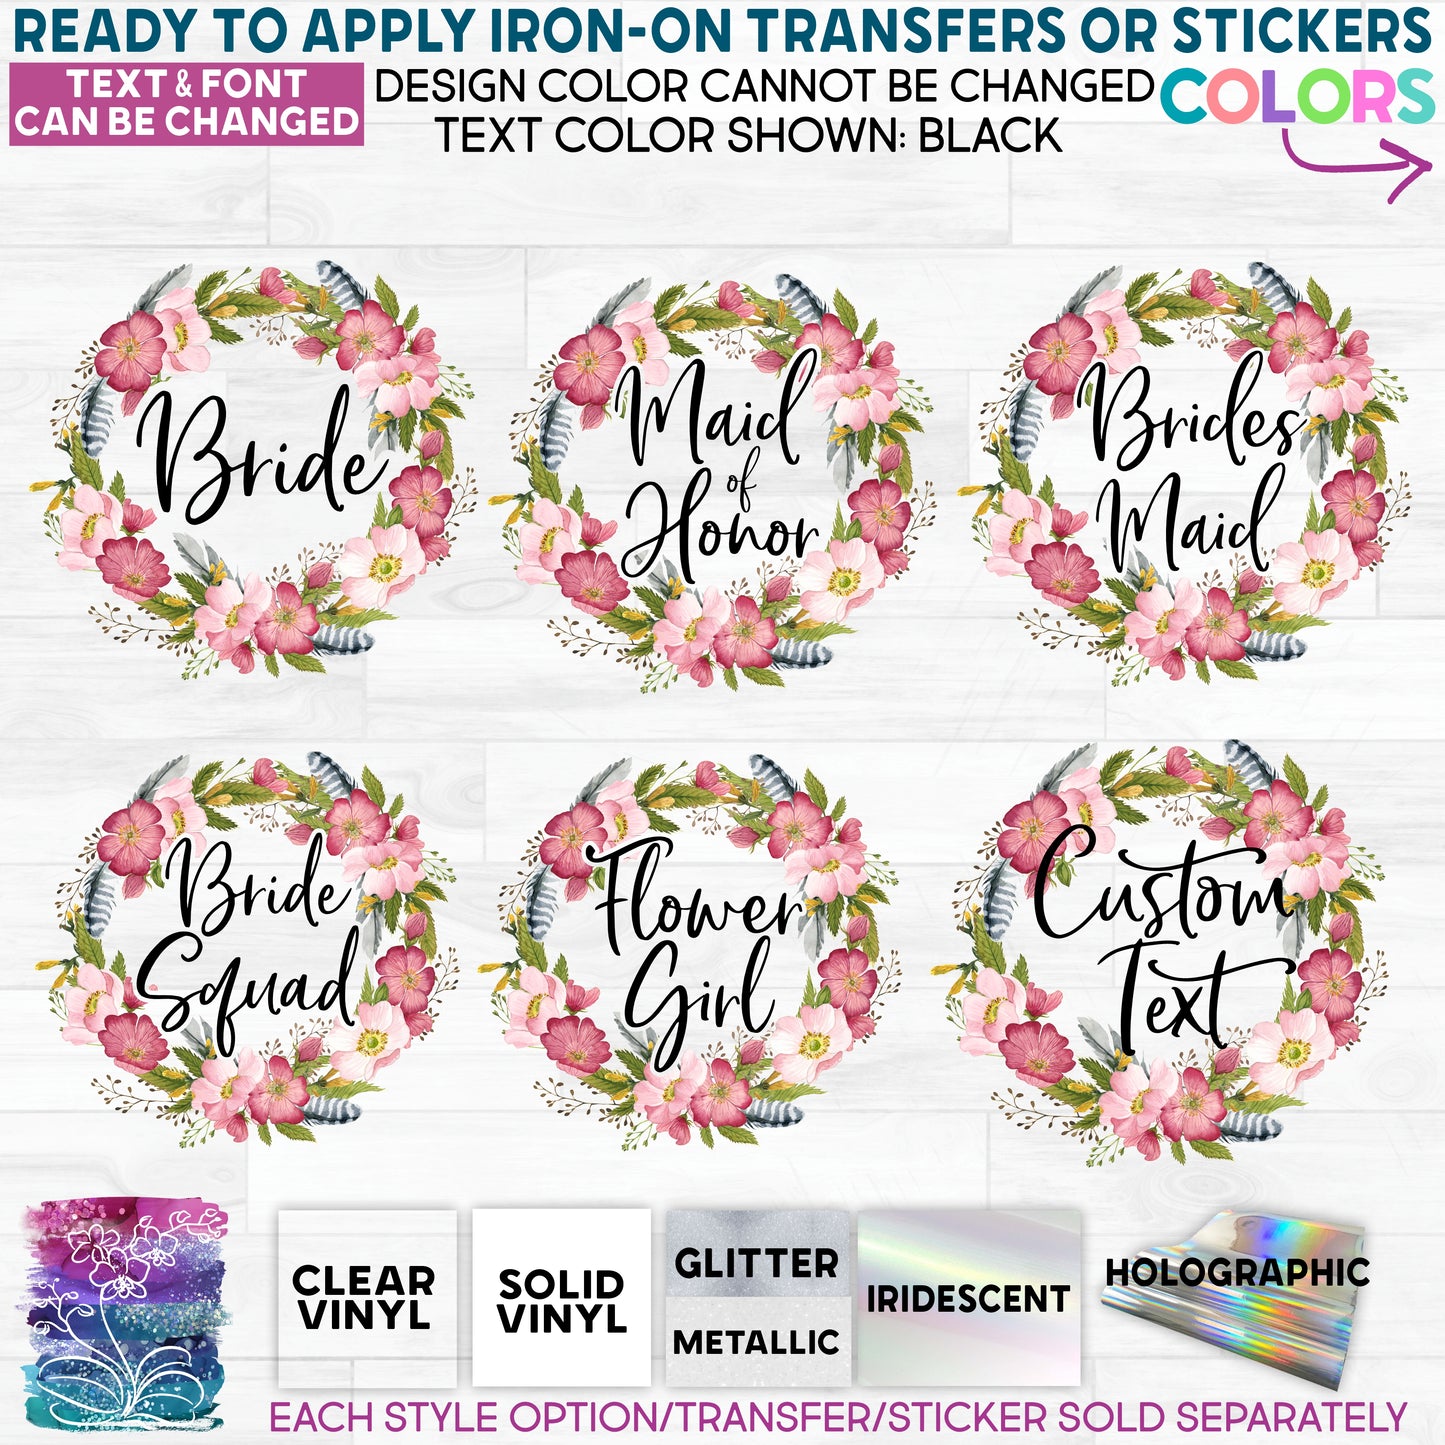 (s002-4) Bridal Wedding Party Wild Rose Floral Flowers Watercolor Glitter or Vinyl Iron-On Transfer or Sticker